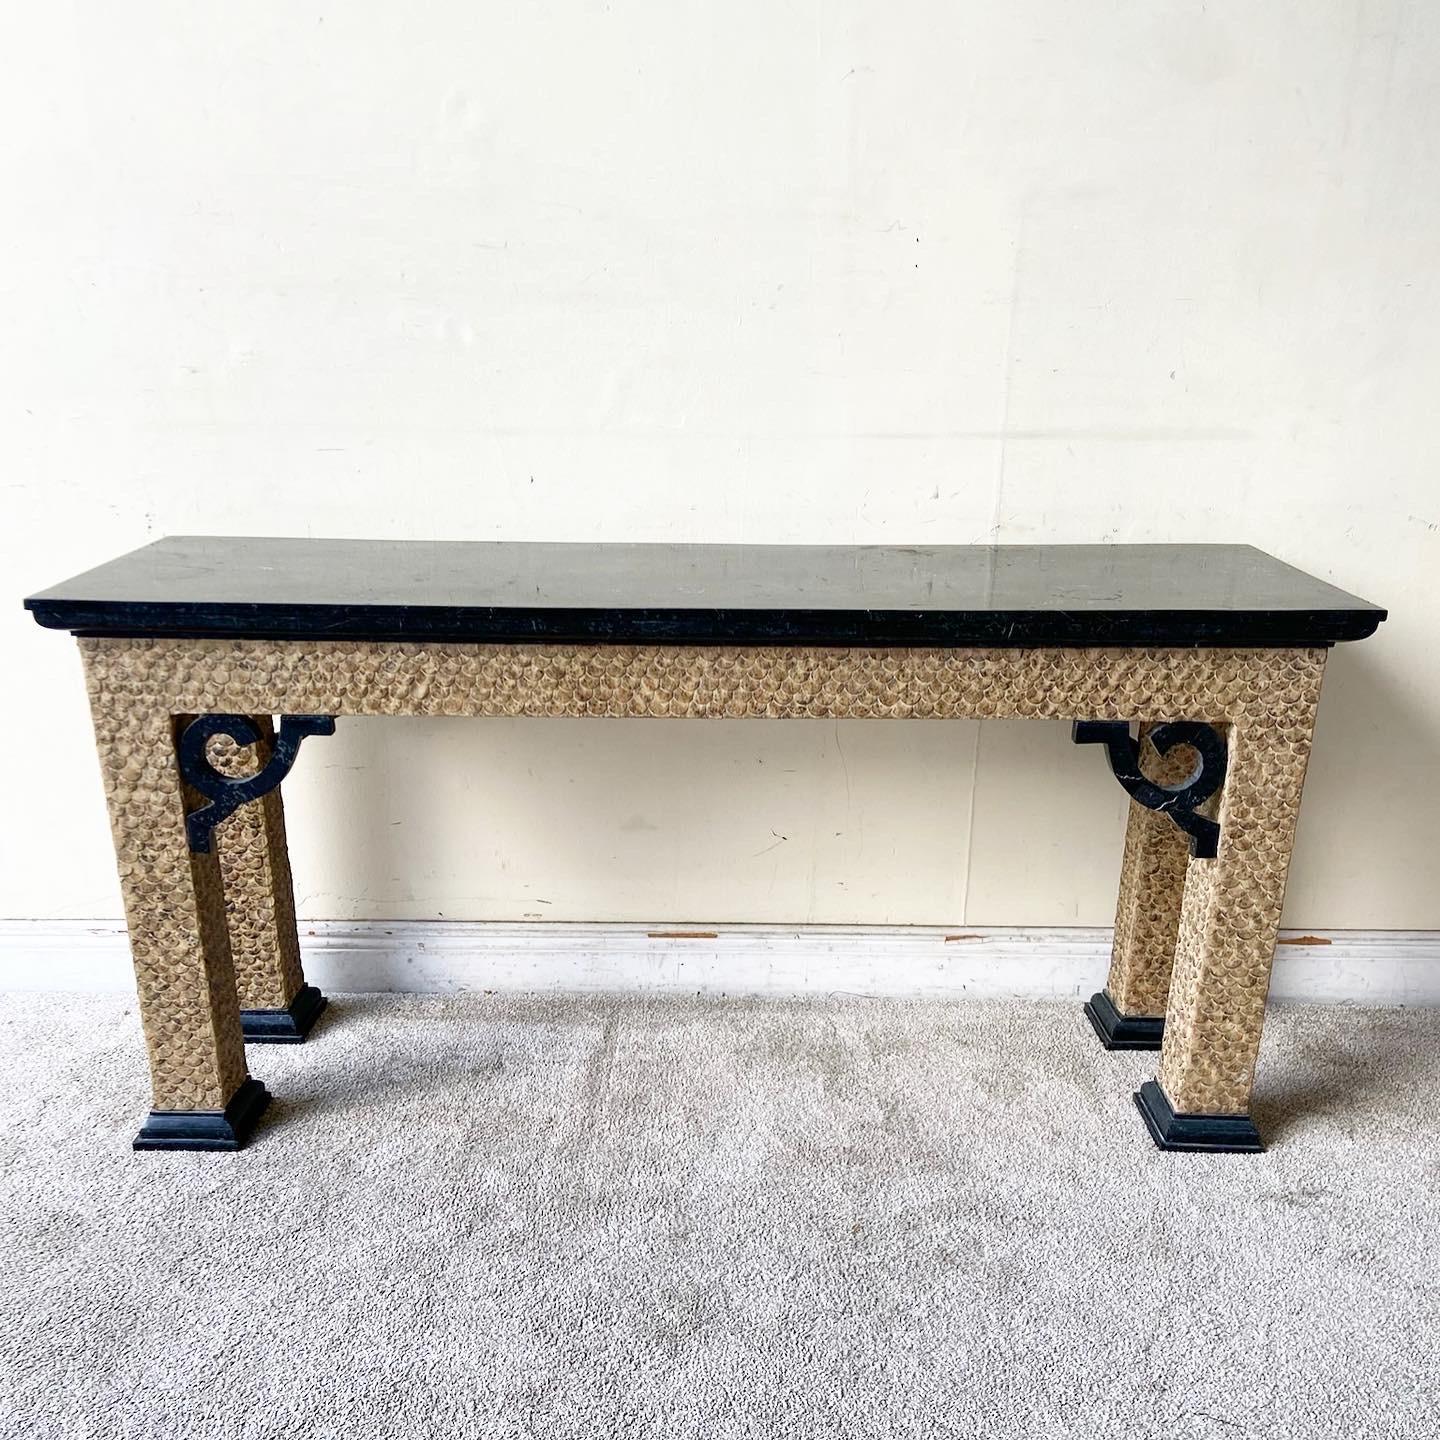 Exceptional vintage chinoiserie console table. Features a tessellated black stone top with a carved wooden frame.
 